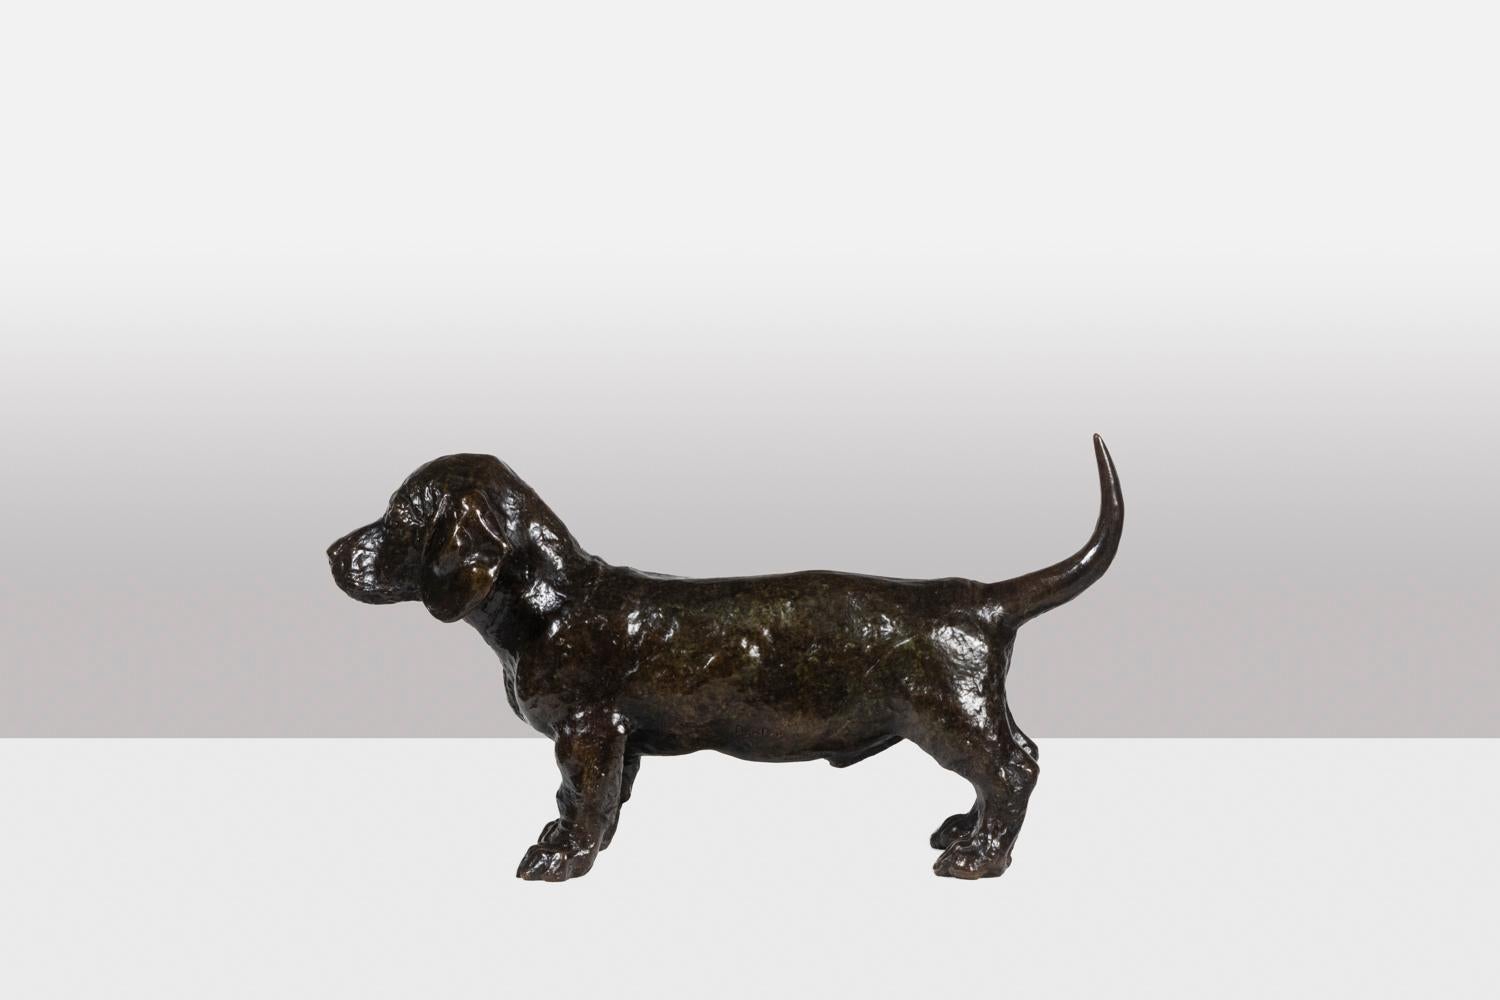 François Pompon.
Atelier Valsuani, edited by.

Sculpture entitled “Chien Basset TOC”. Bronze with brown patina, lost wax casting.

Stamp of the Foundry “cire perdue C. Valsuani”. Reproduction dated 2006. Numbered 9/25.

Reference: LS59813967H